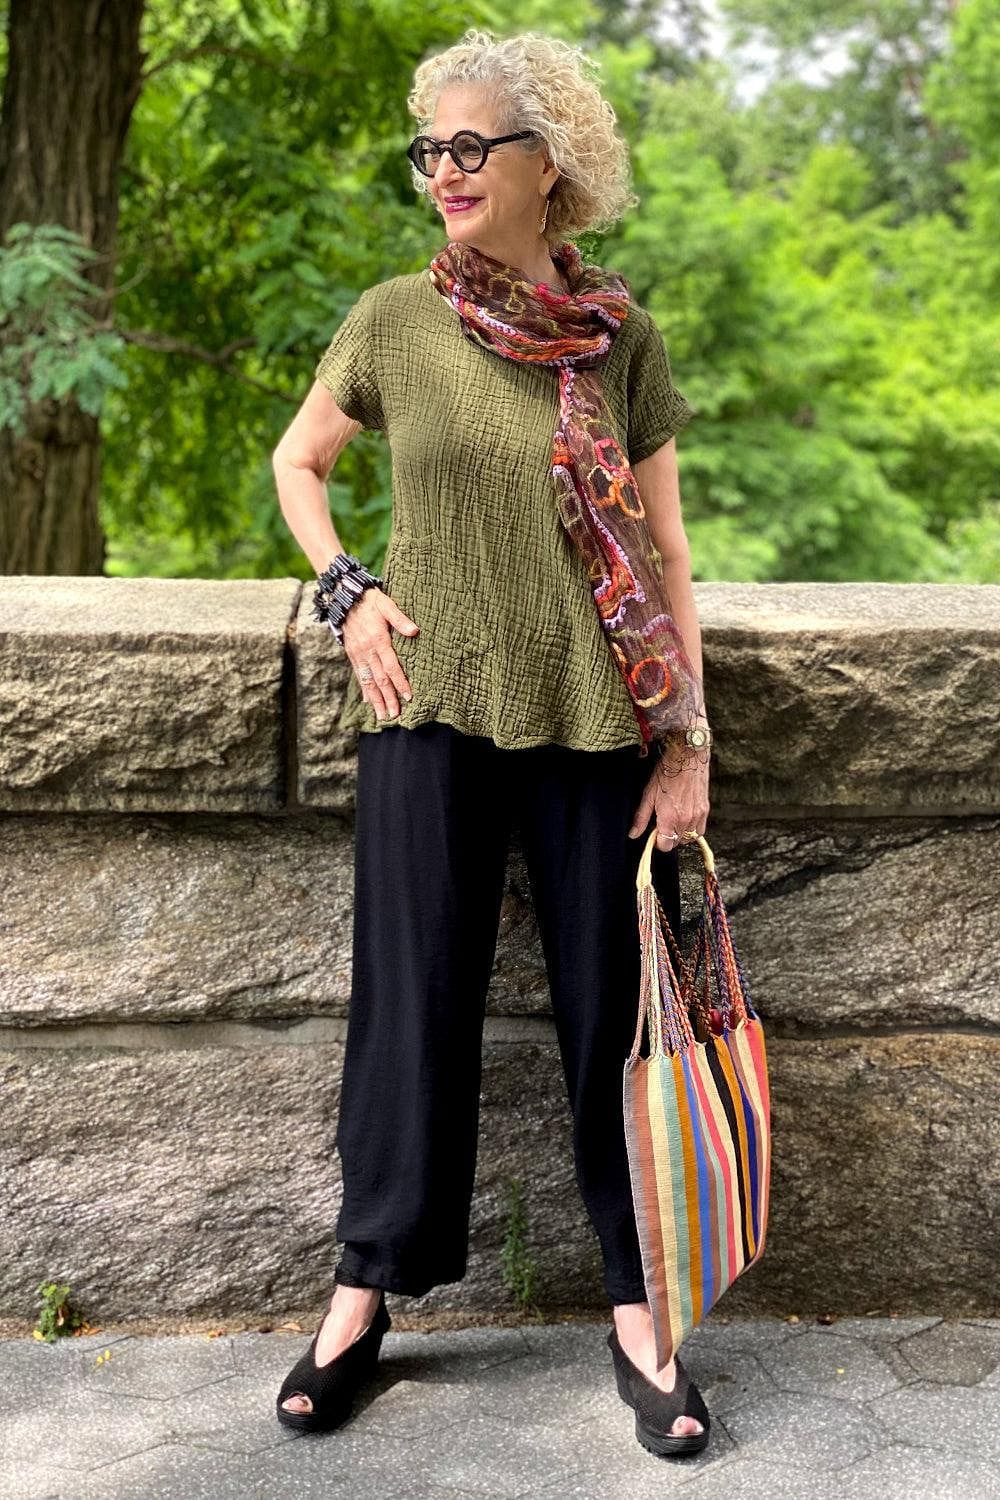 Olive Women's Cotton aline top with short sleeves. Styled with a scarf, bracelet and woven tote bag.